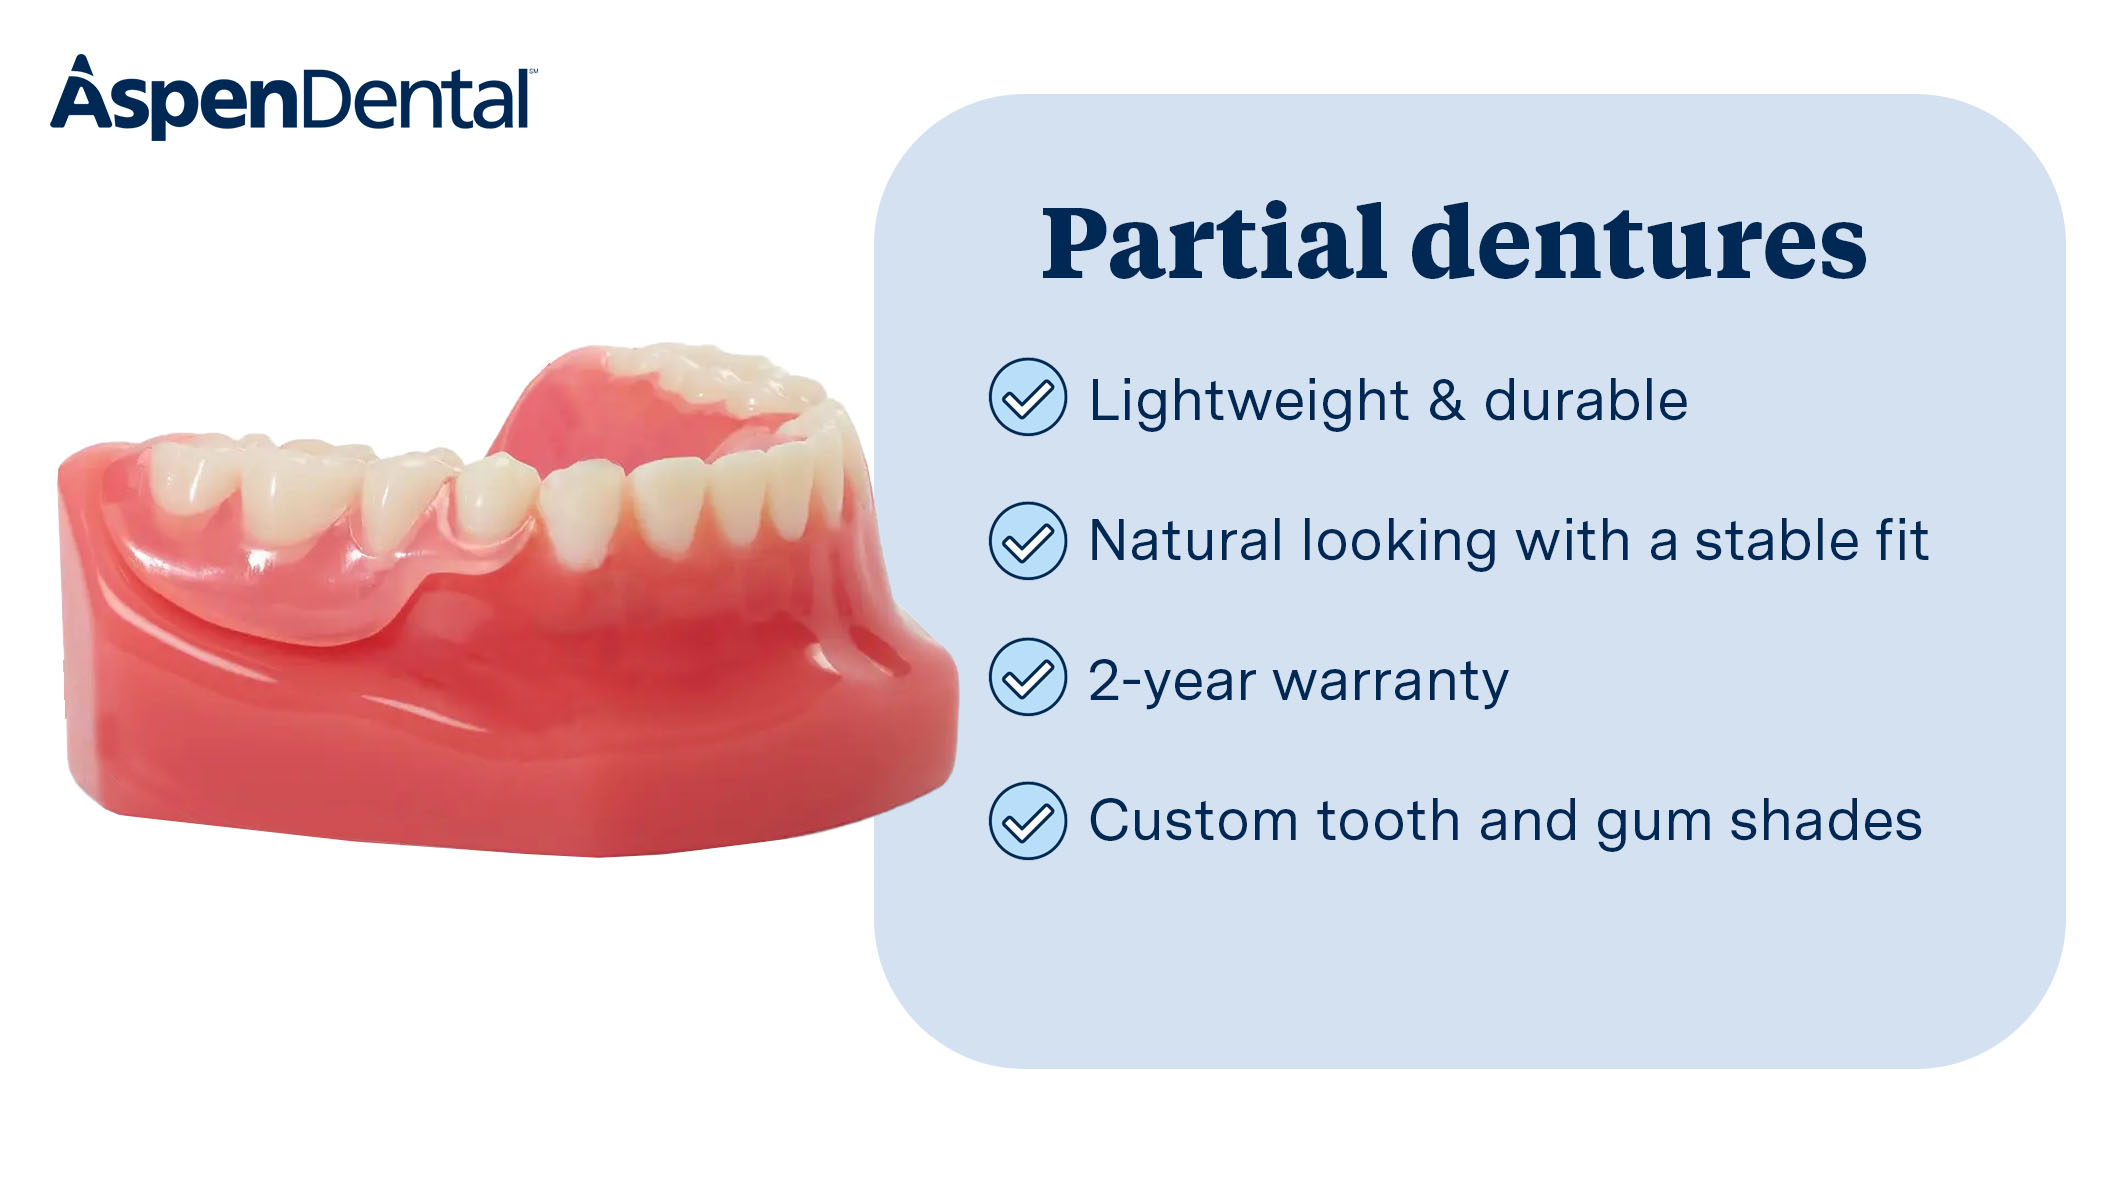 Restore your smile with our customizable partial dentures. Lightweight, durable, natural-looking, an Aspen Dental - Rowlett, TX Rowlett (972)535-2100